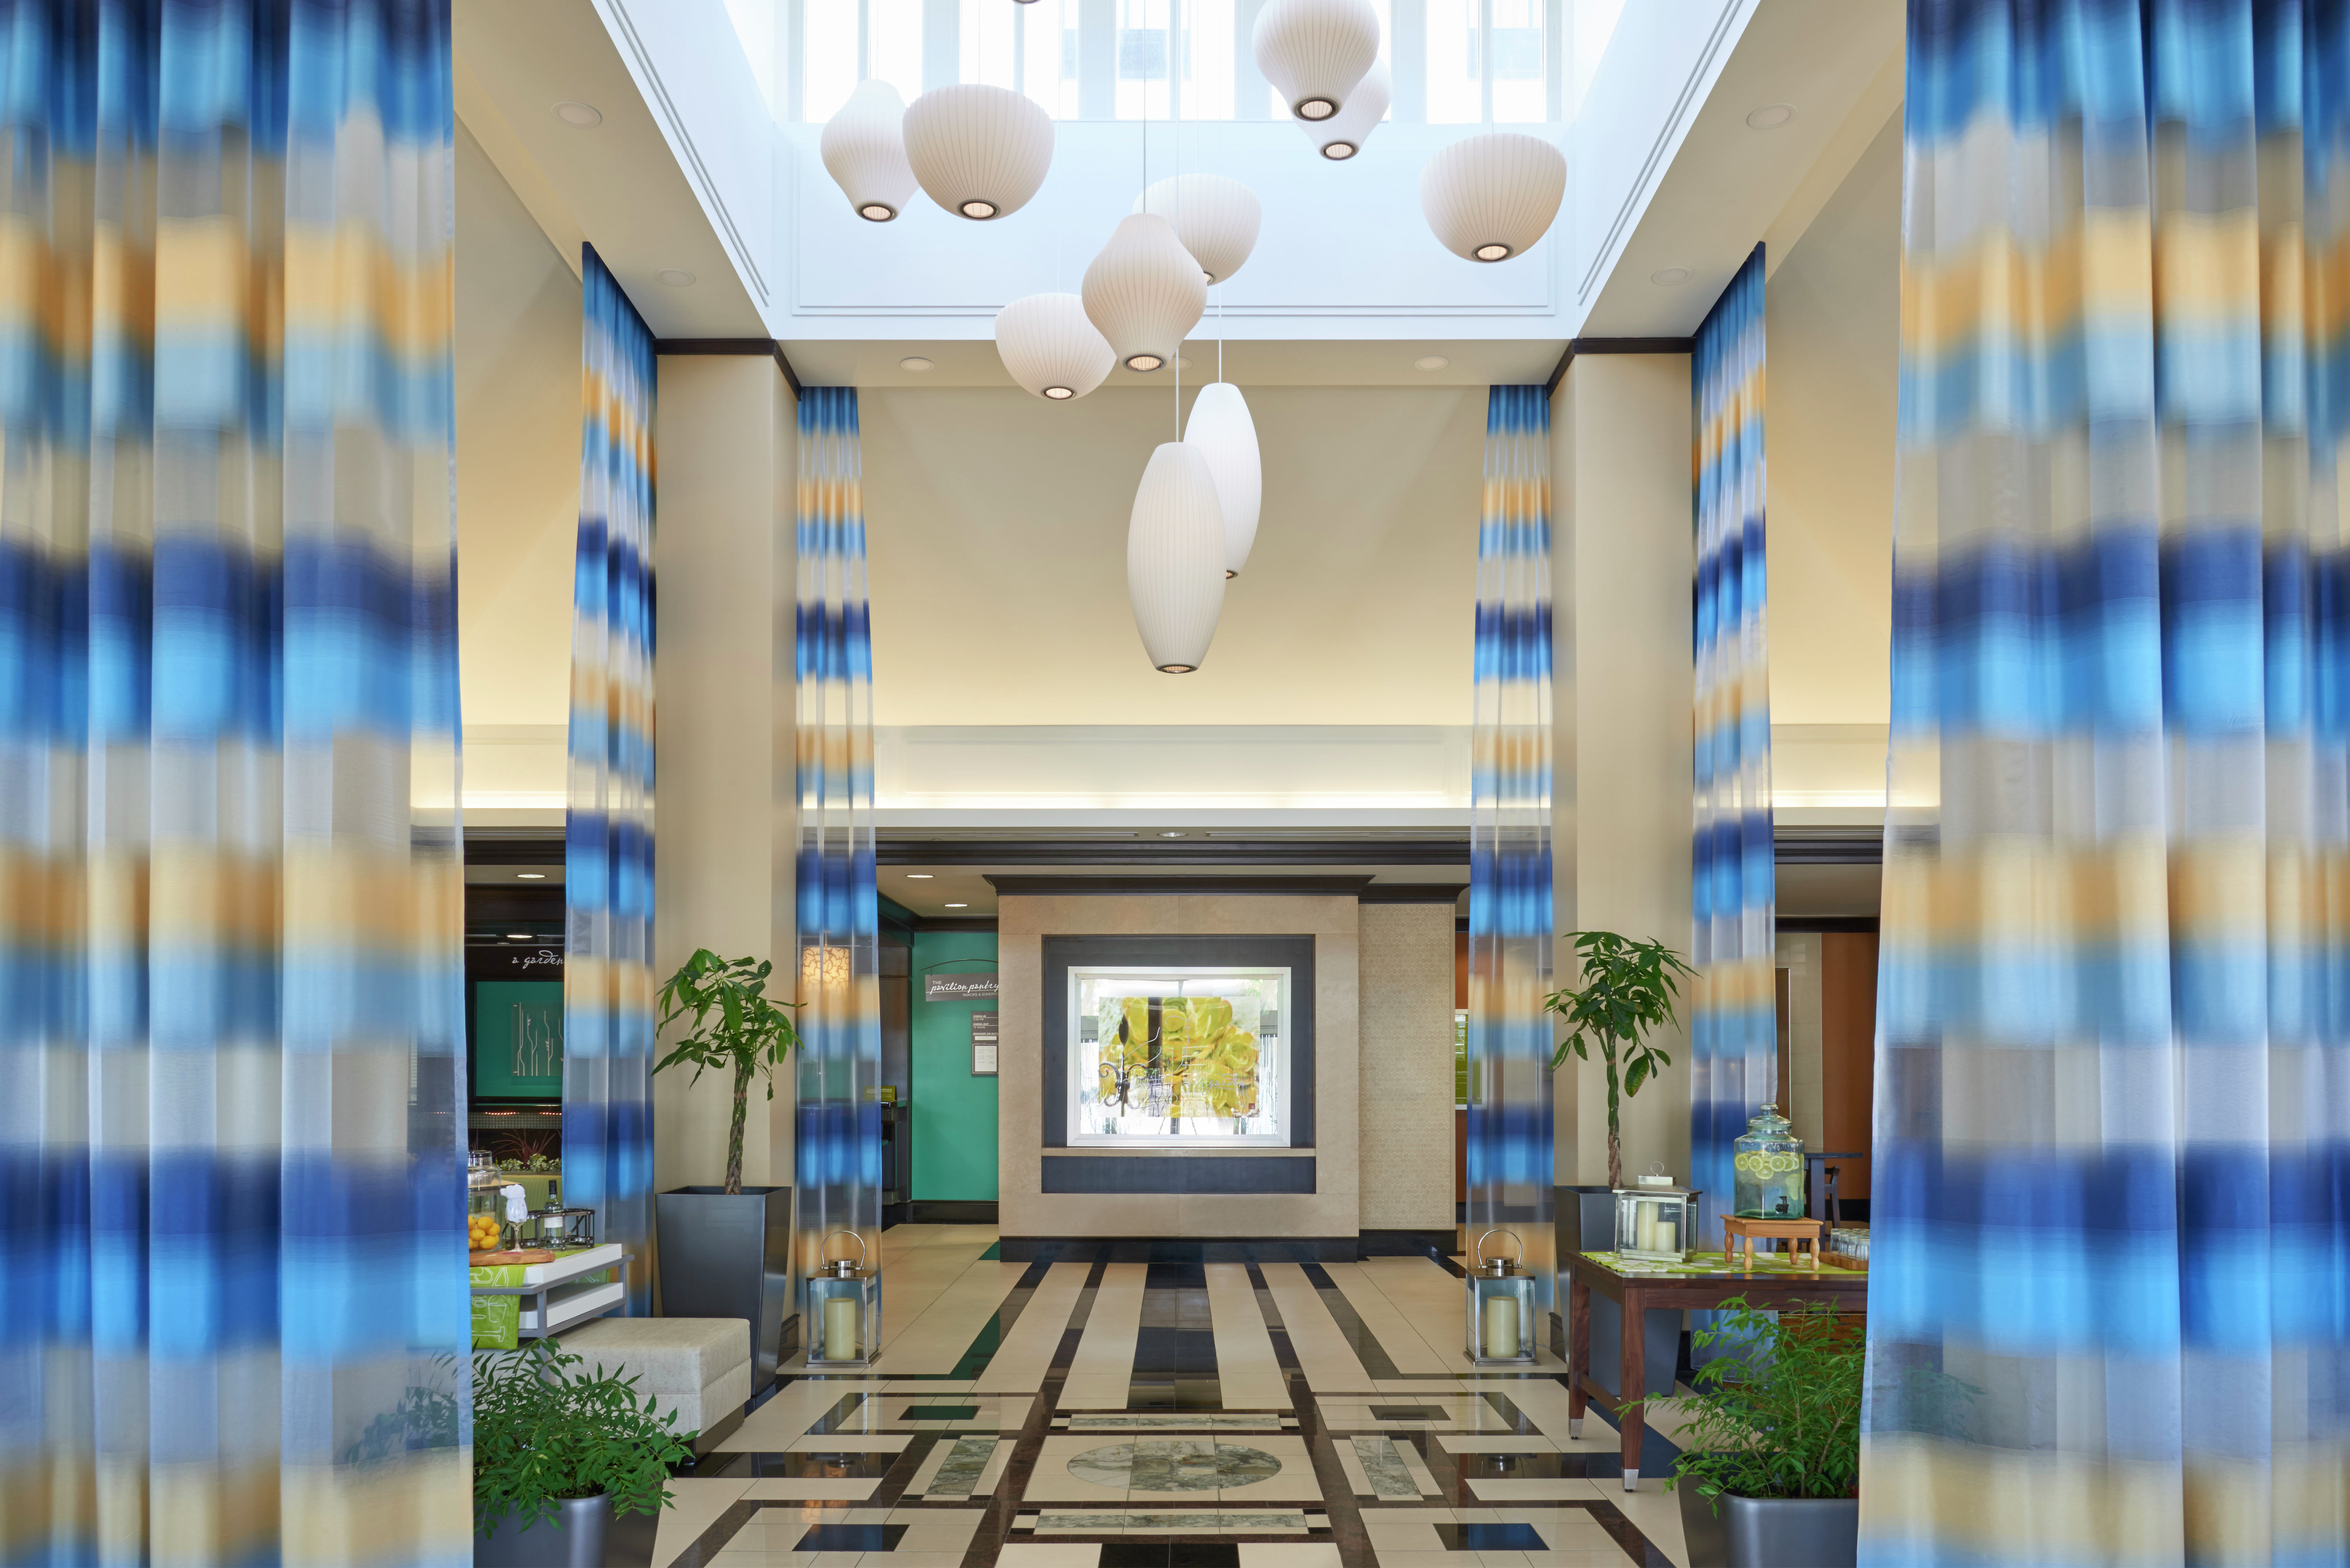 Two Beverage Service Tables in Vast Lobby With Long Drapes, Decorative Lighting, Lounge Seating and Art Feature